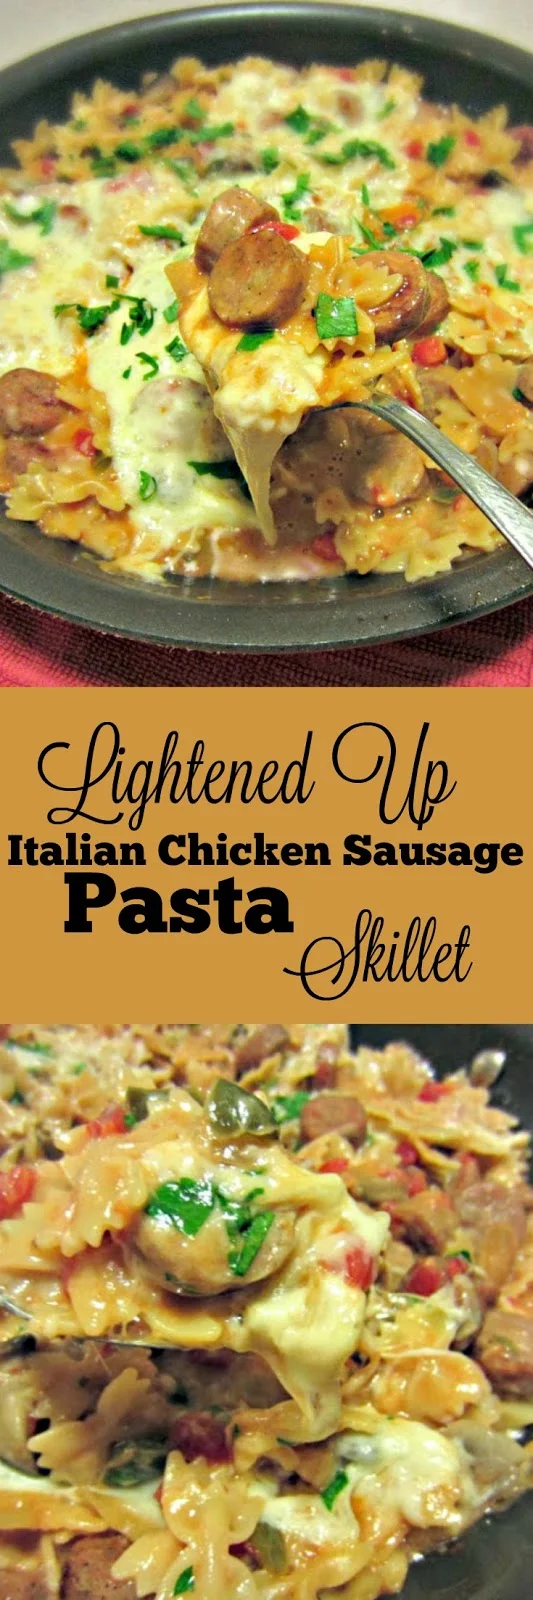 Lightented Up Italian Chicken Sausage Pasta Skillet | by Renee's Kitchen Adventures - Easy recipe for a quick dinner on a hectic day that the whole family will love!  Cheesy goodness in every bite! 